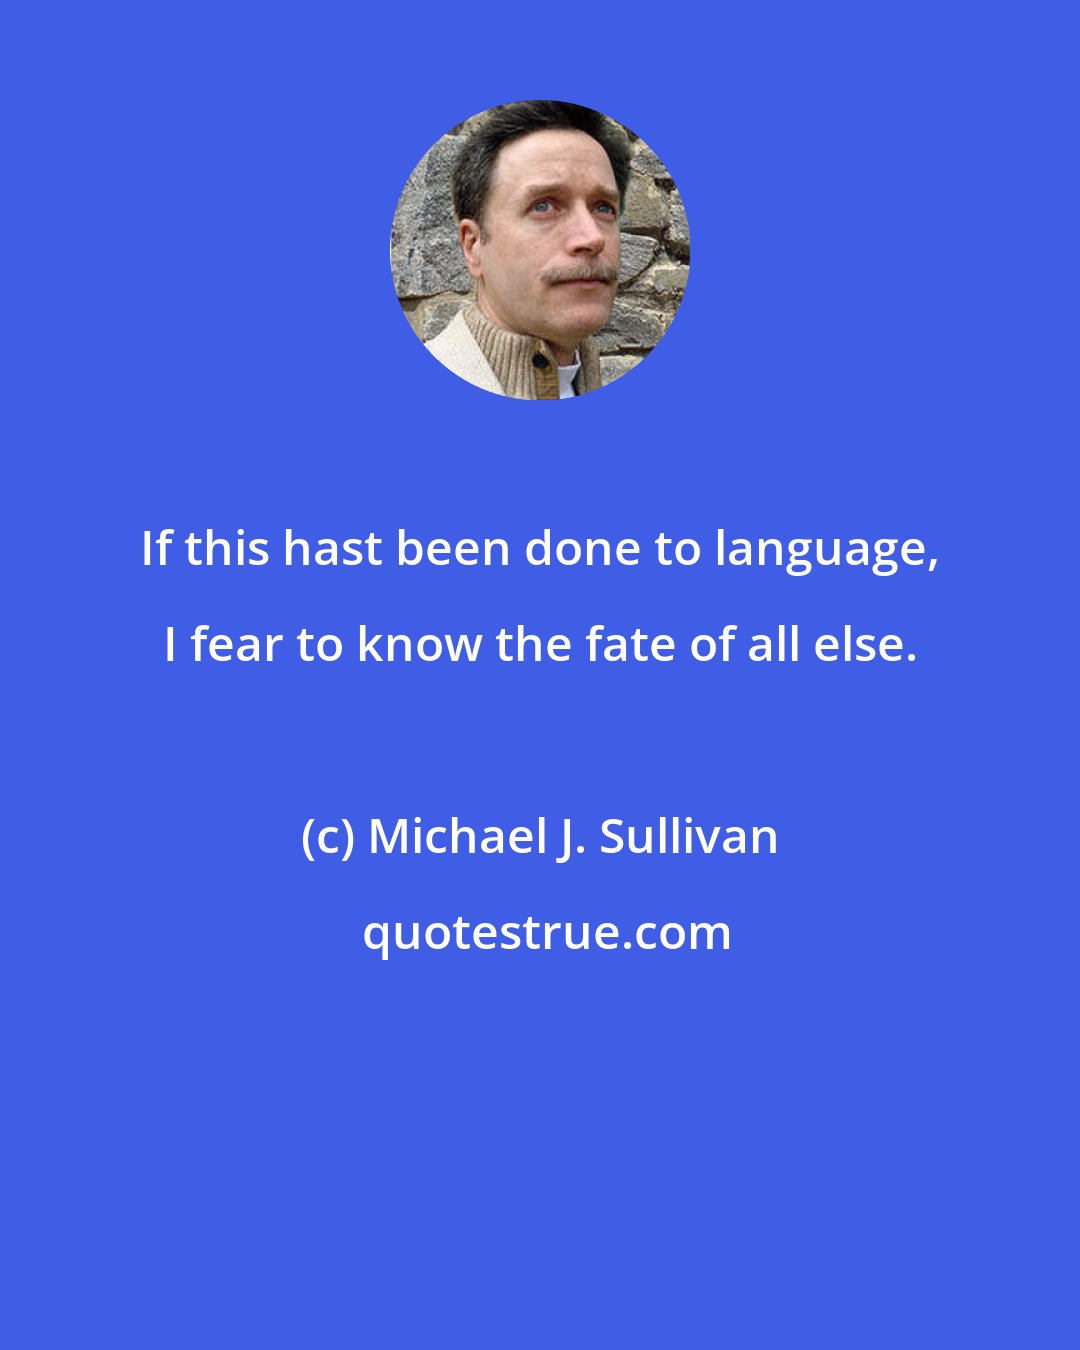 Michael J. Sullivan: If this hast been done to language, I fear to know the fate of all else.